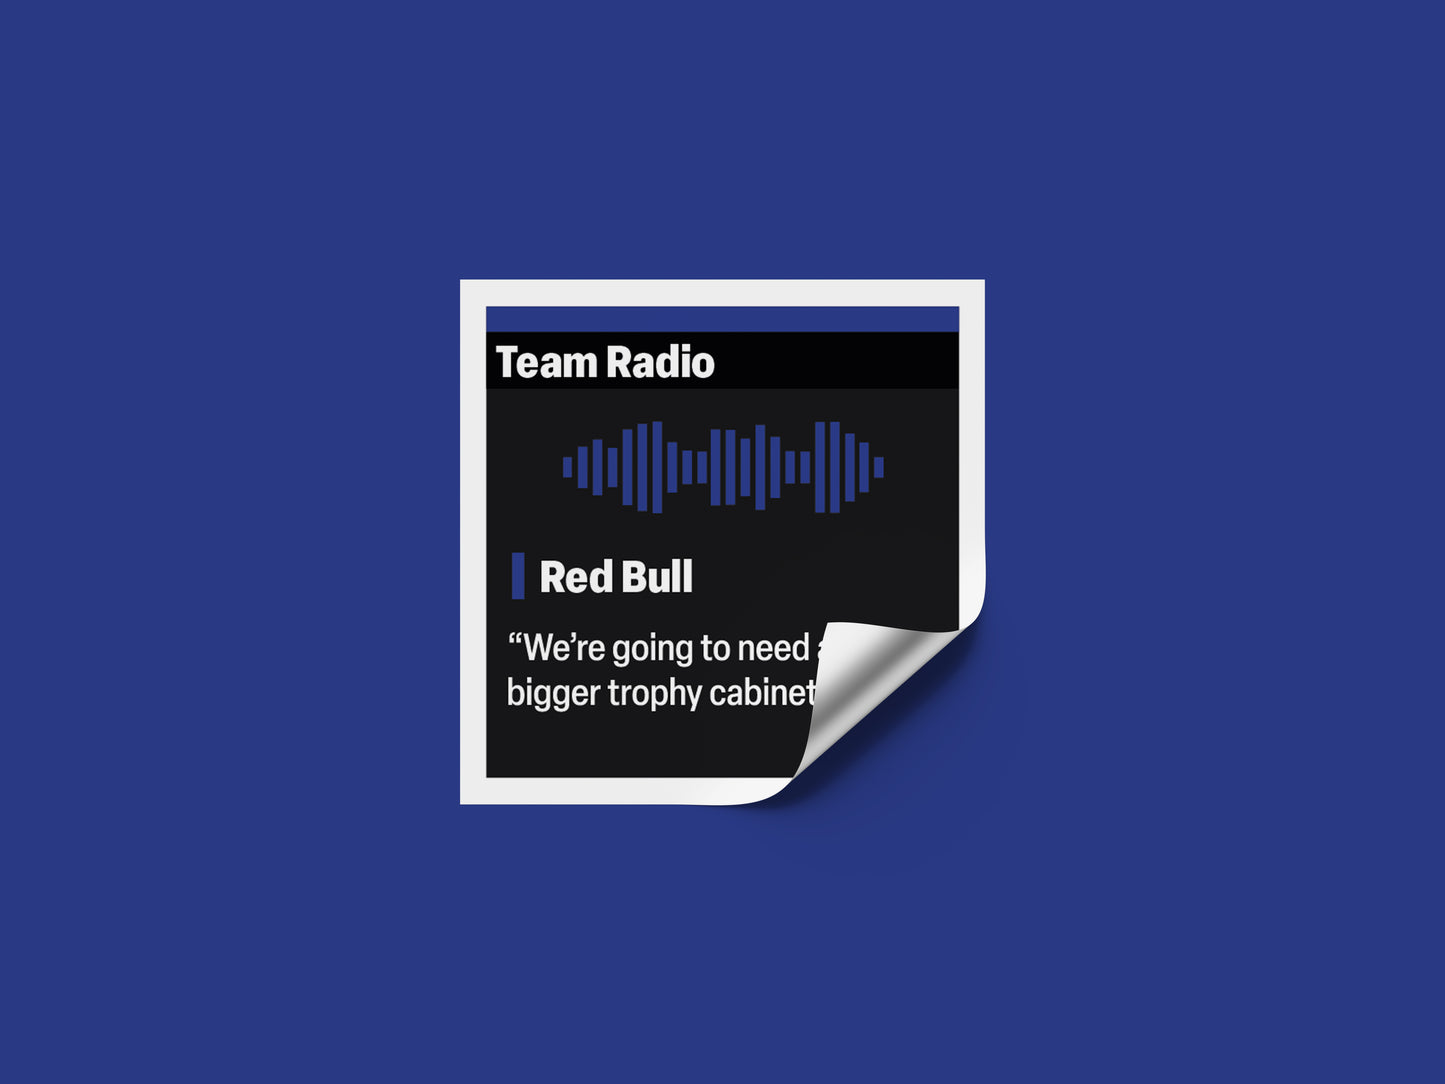 Max Verstappen "We're going to need a bigger trophy cabinet!" F1 Radio Message Sticker